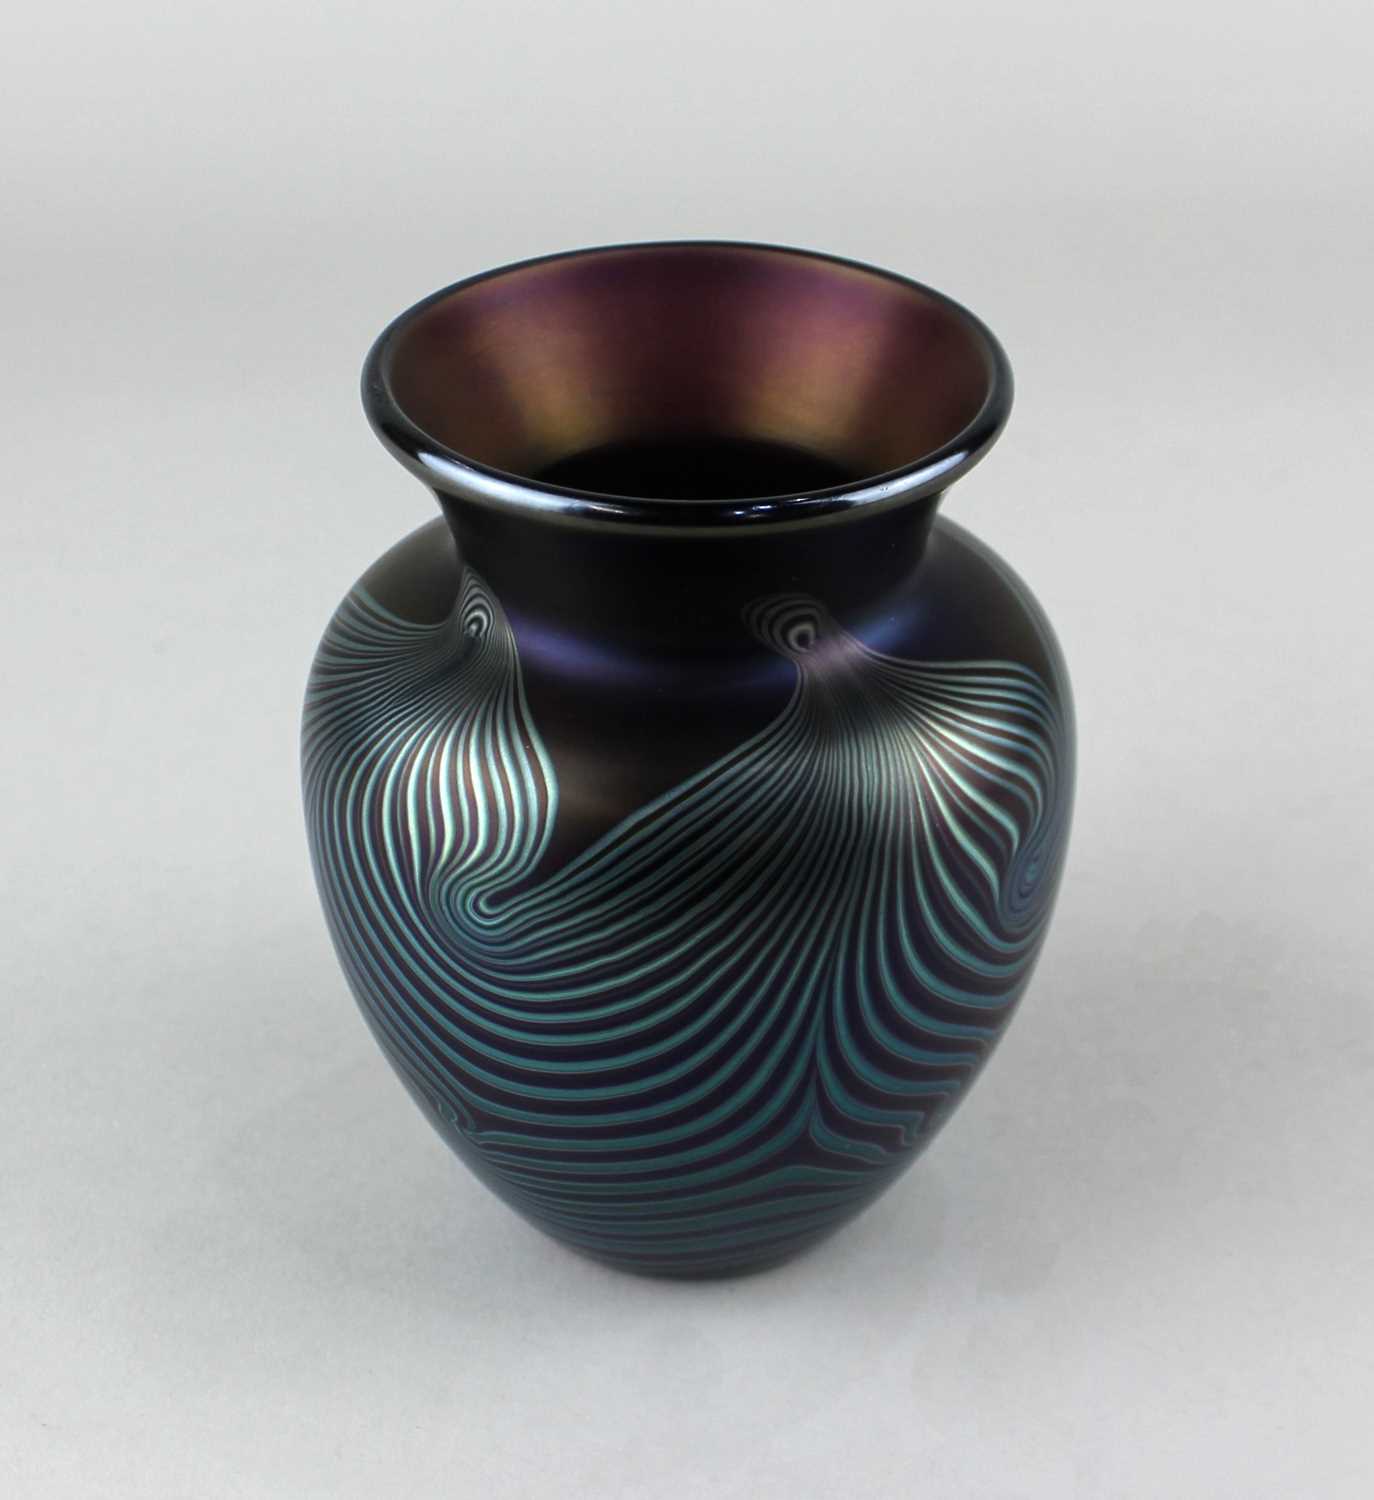 An Okra iridescent glass vase with swirled design, the base engraved 'Okra Glass Guild Founder